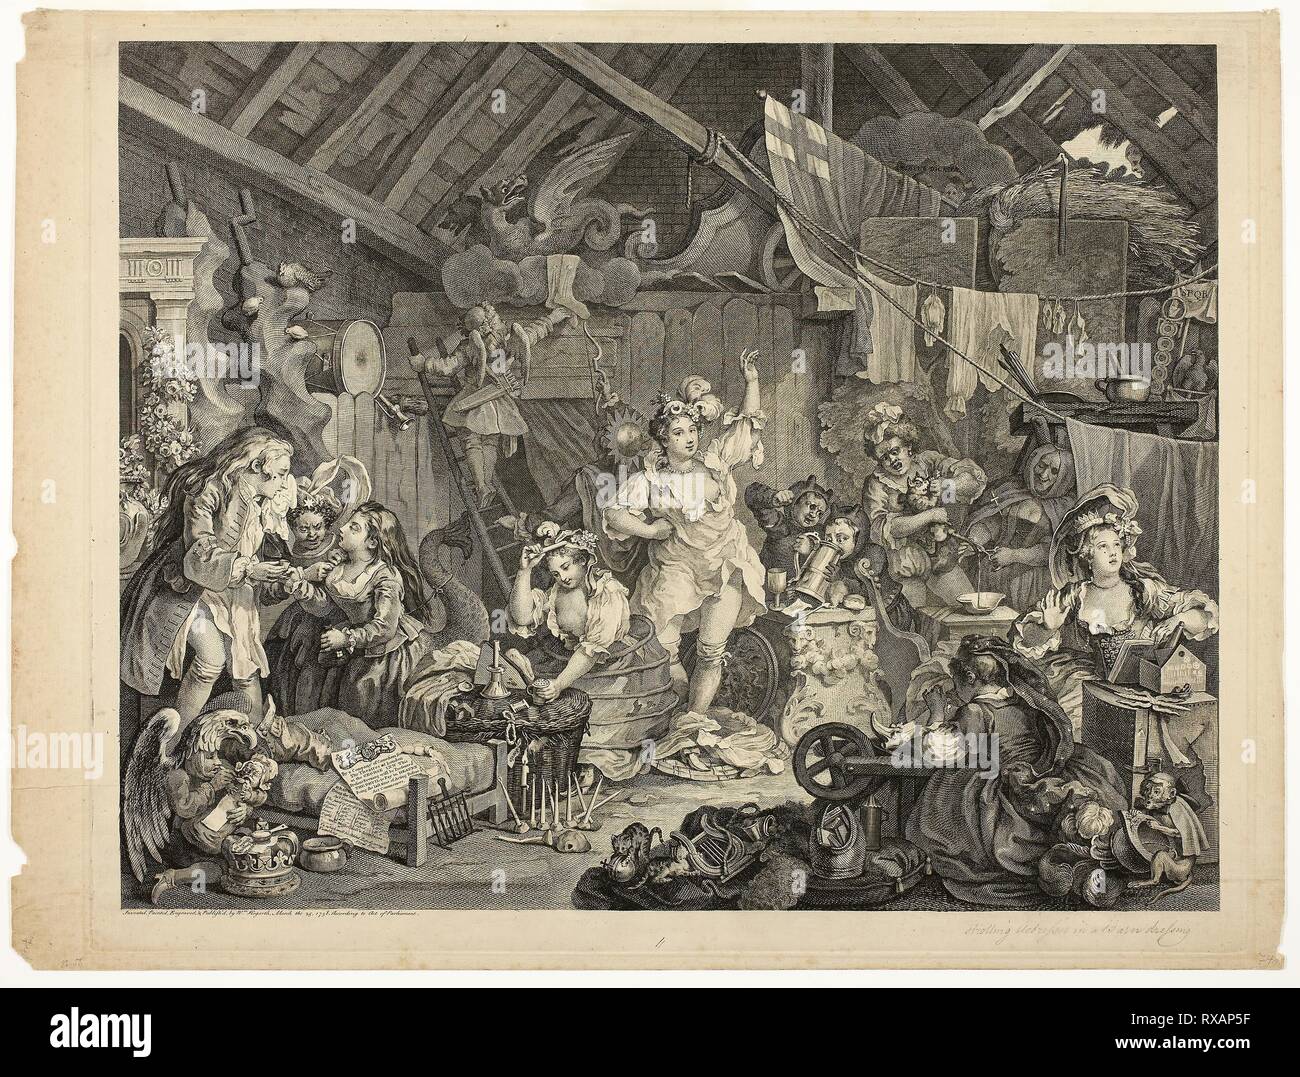 Strolling Actresses Dressing in a Barn. William Hogarth; English, 1697-1764. Date: 1738. Dimensions: 423 × 537 mm (image); 460 × 562 mm (plate); 470 × 620 mm (sheet). Etching and engraving in black on cream laid paper. Origin: England. Museum: The Chicago Art Institute. Stock Photo